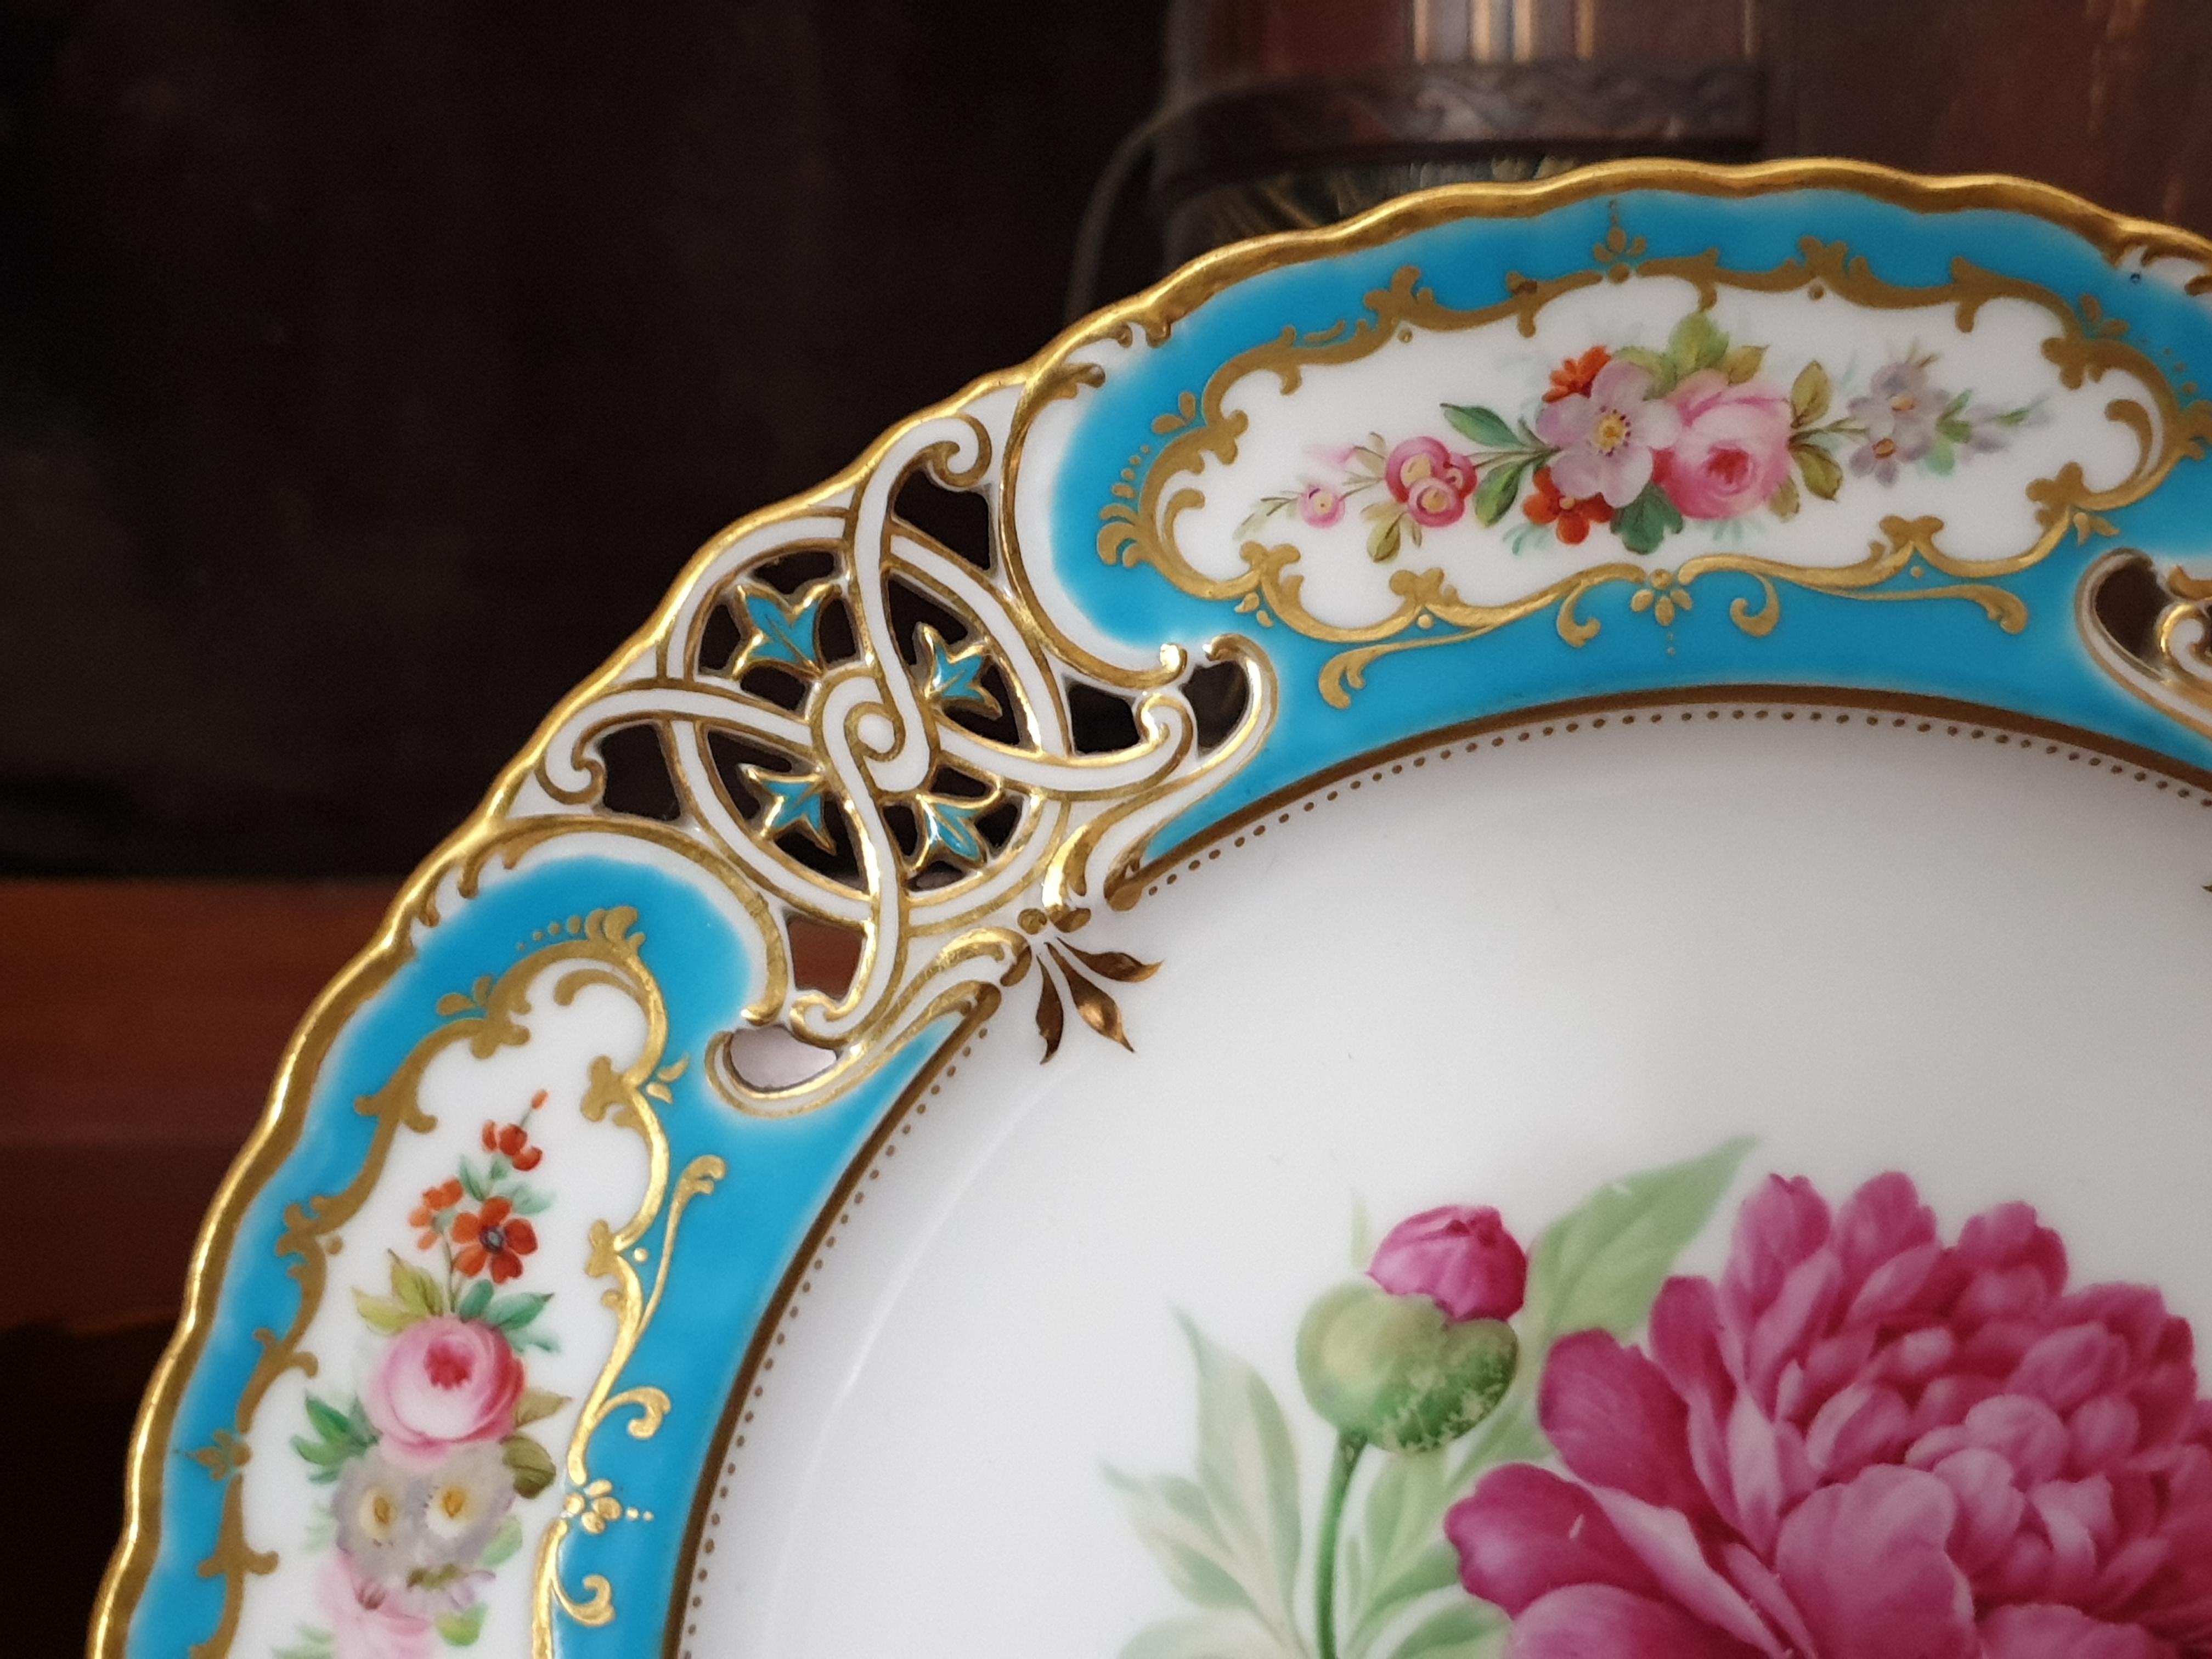 Porcelain English Minton Reticulated Royal Arms Botanical Turquoise Dessert Service For Sale